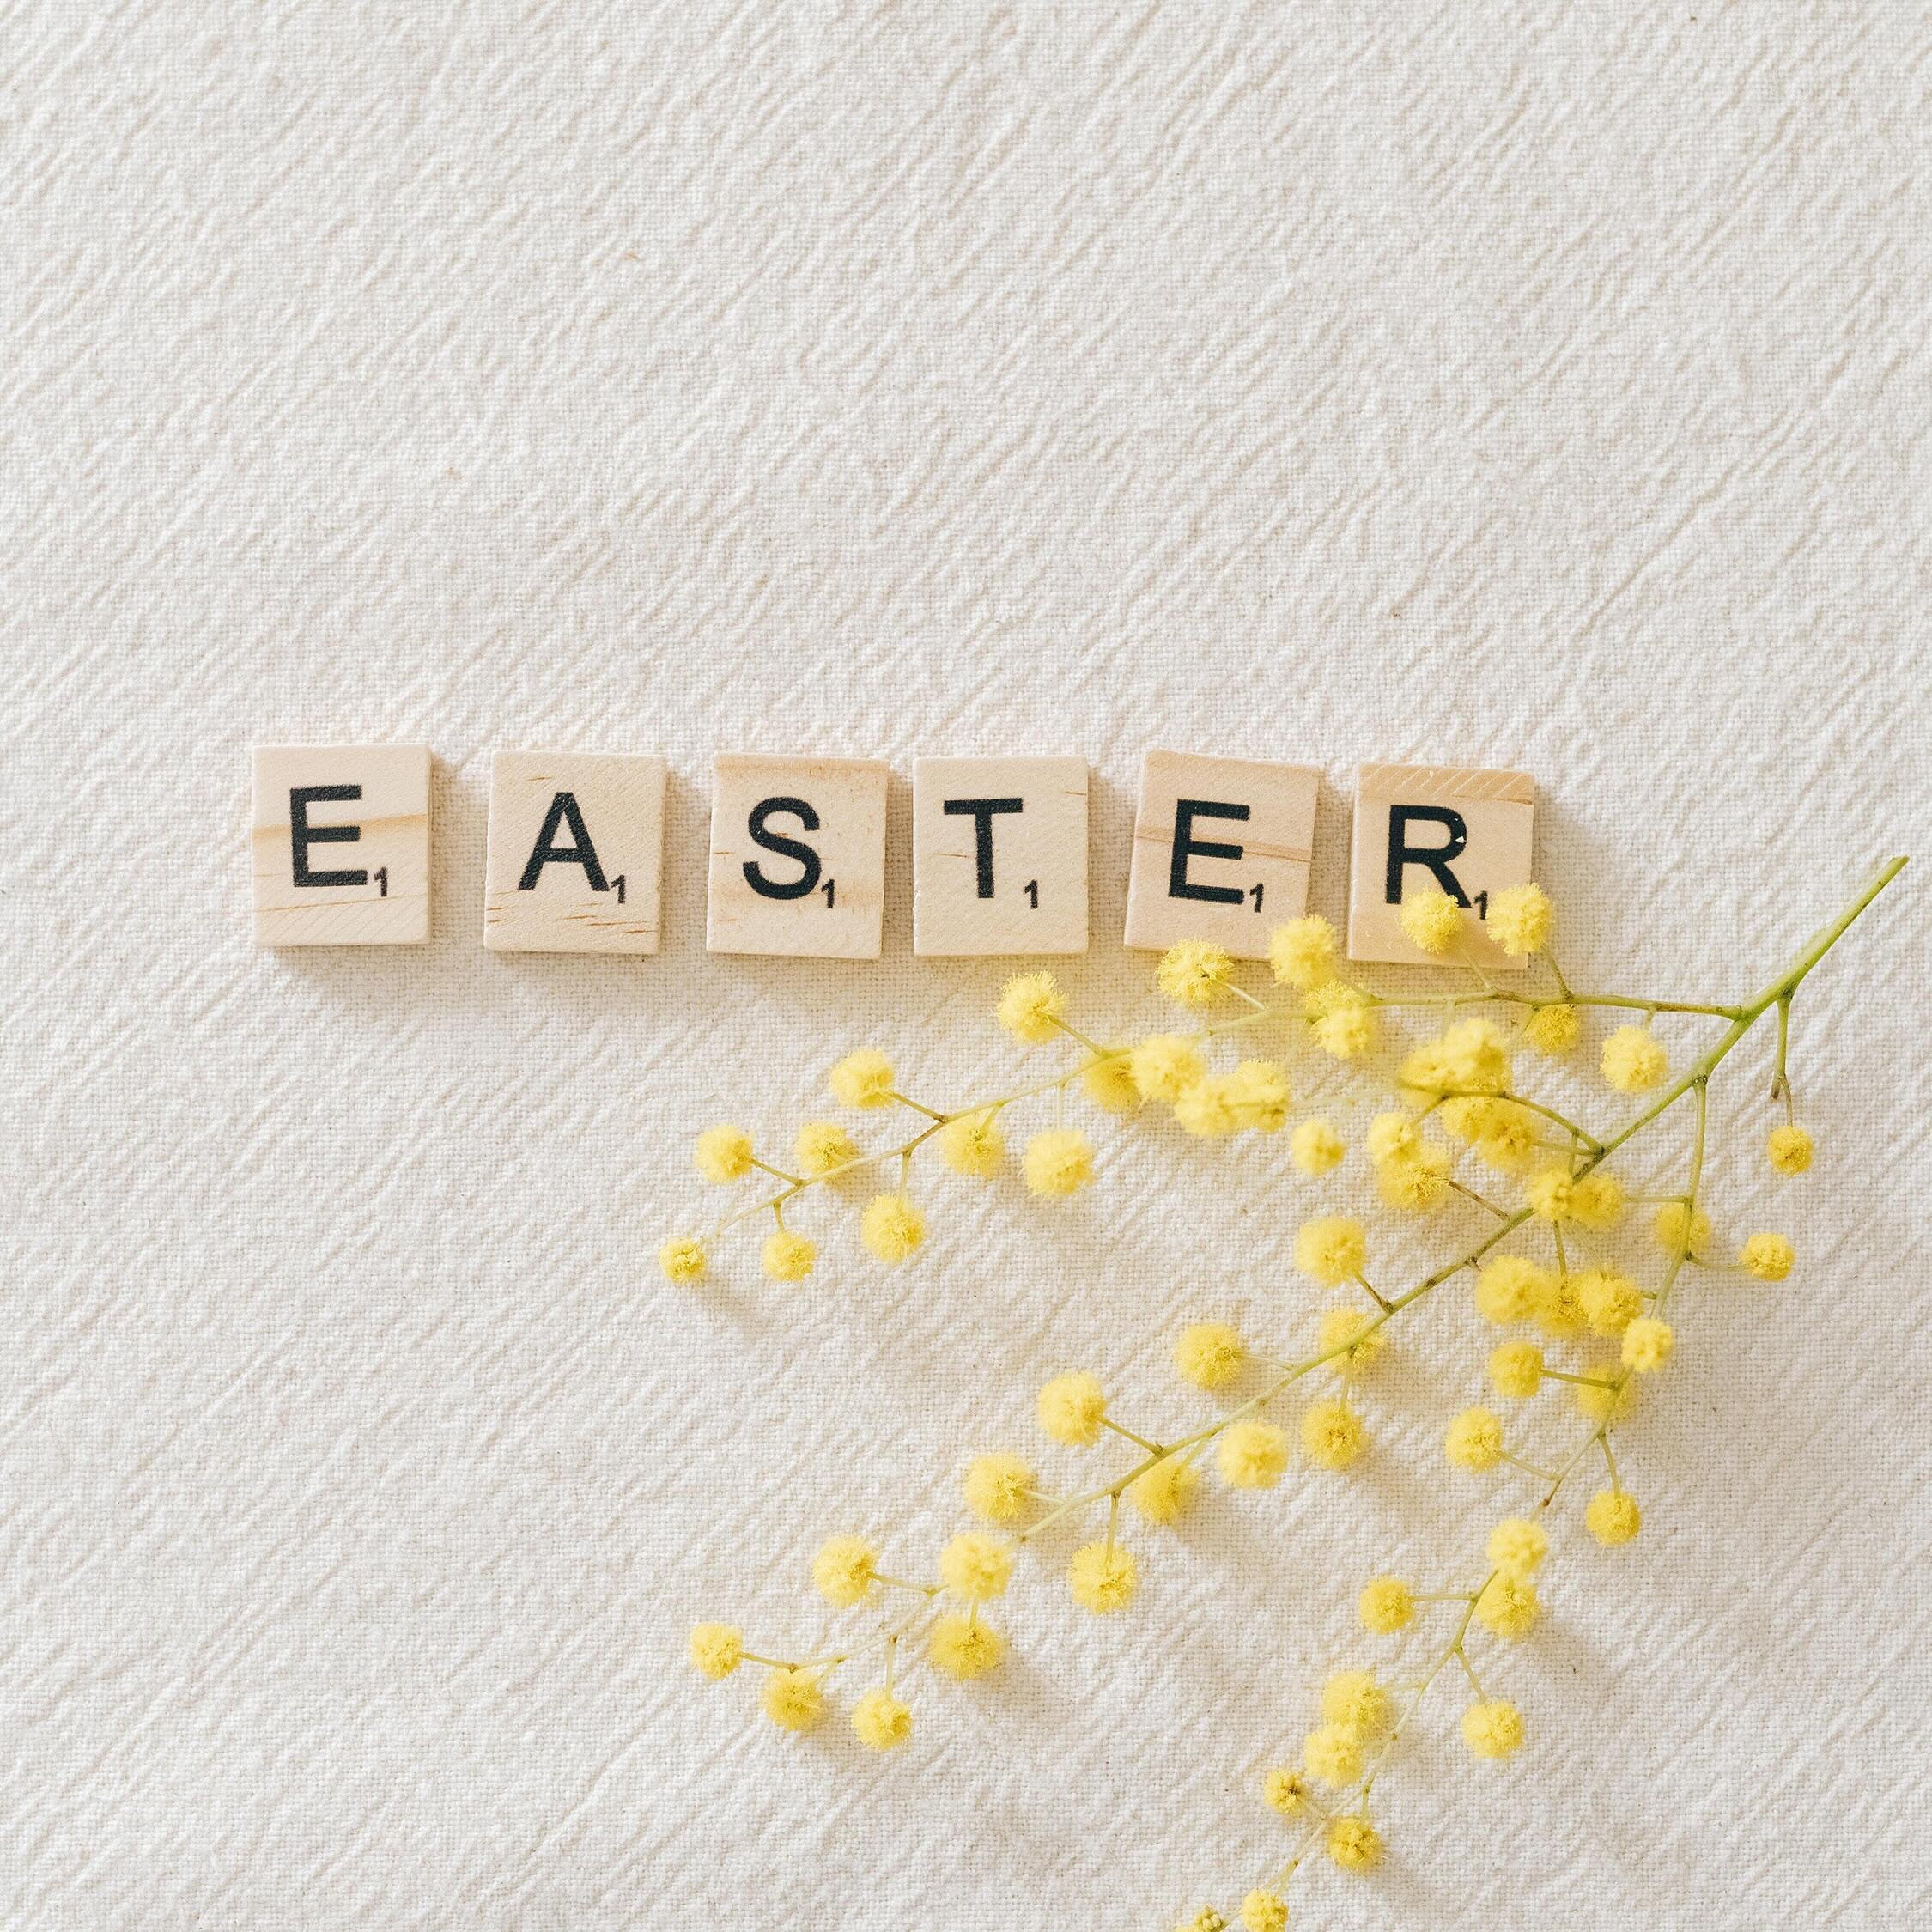 Wishing everyone a wonderful Easter. 

Take sometime this weekend to decide what moves forward with you. We are now in to the 2nd quarter of the year and in a new season. 

Easter is a time of rebirth, newness and shedding so take some time this week